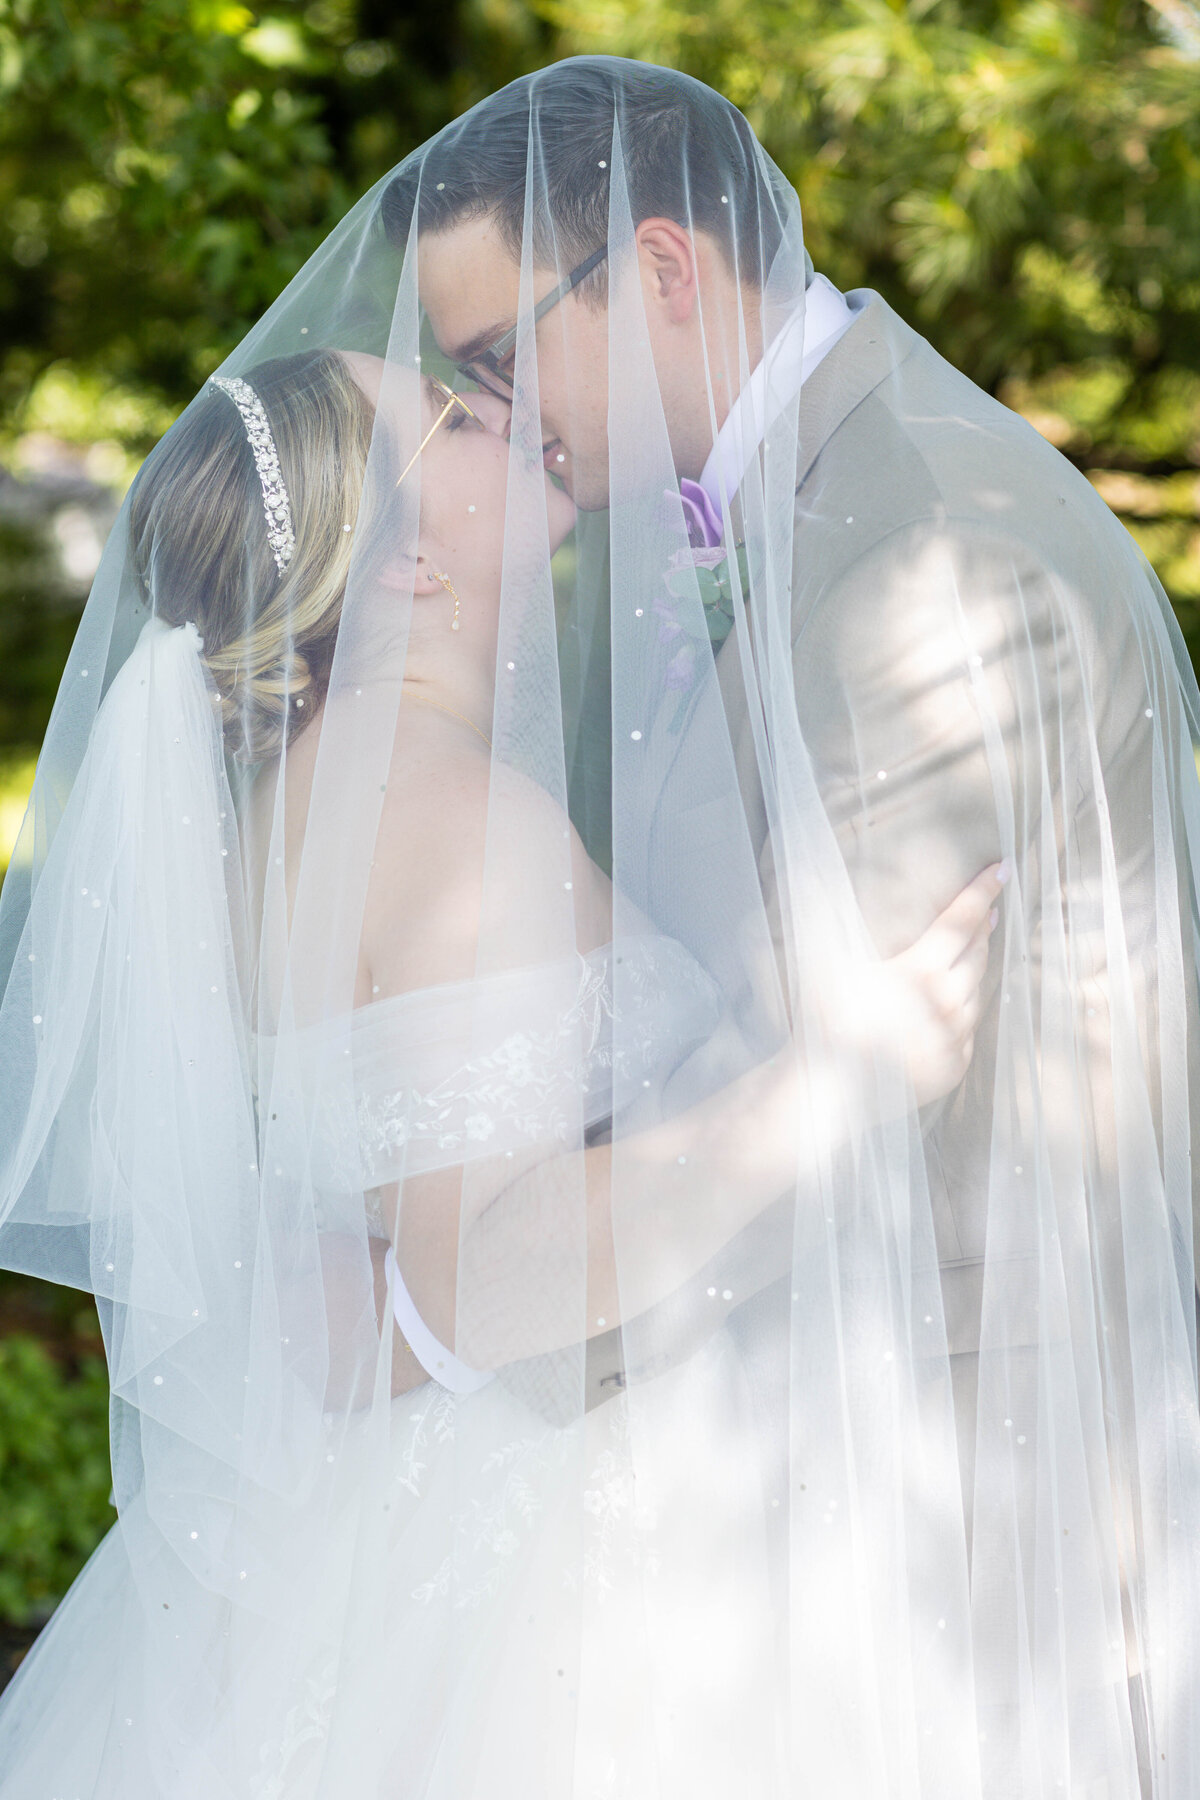 Mustard-Seed-Garden-Indianapolis-Indiana-Wedding-Photography-Colien-and-Zack-57